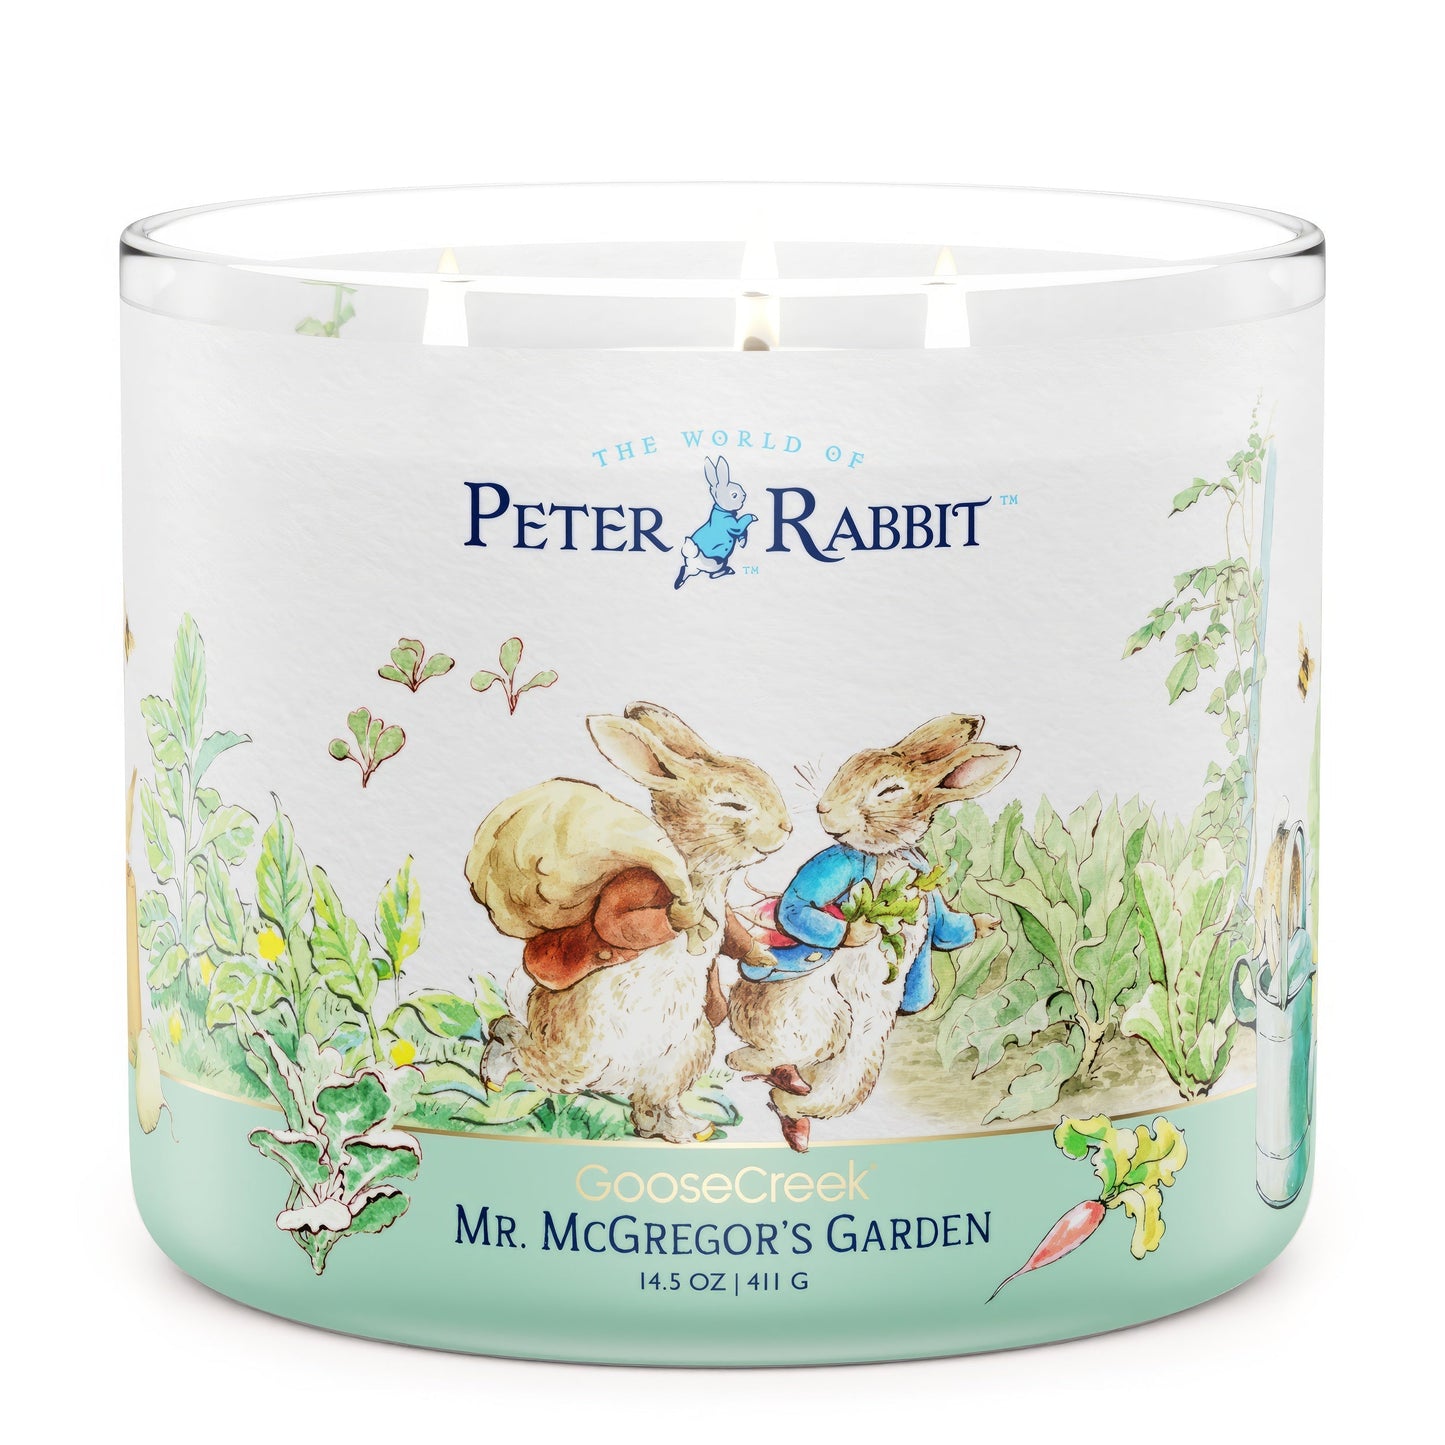 Peter Rabbit Limited Edition Collector's Box - Includes 10 Large 3-Wick Candles